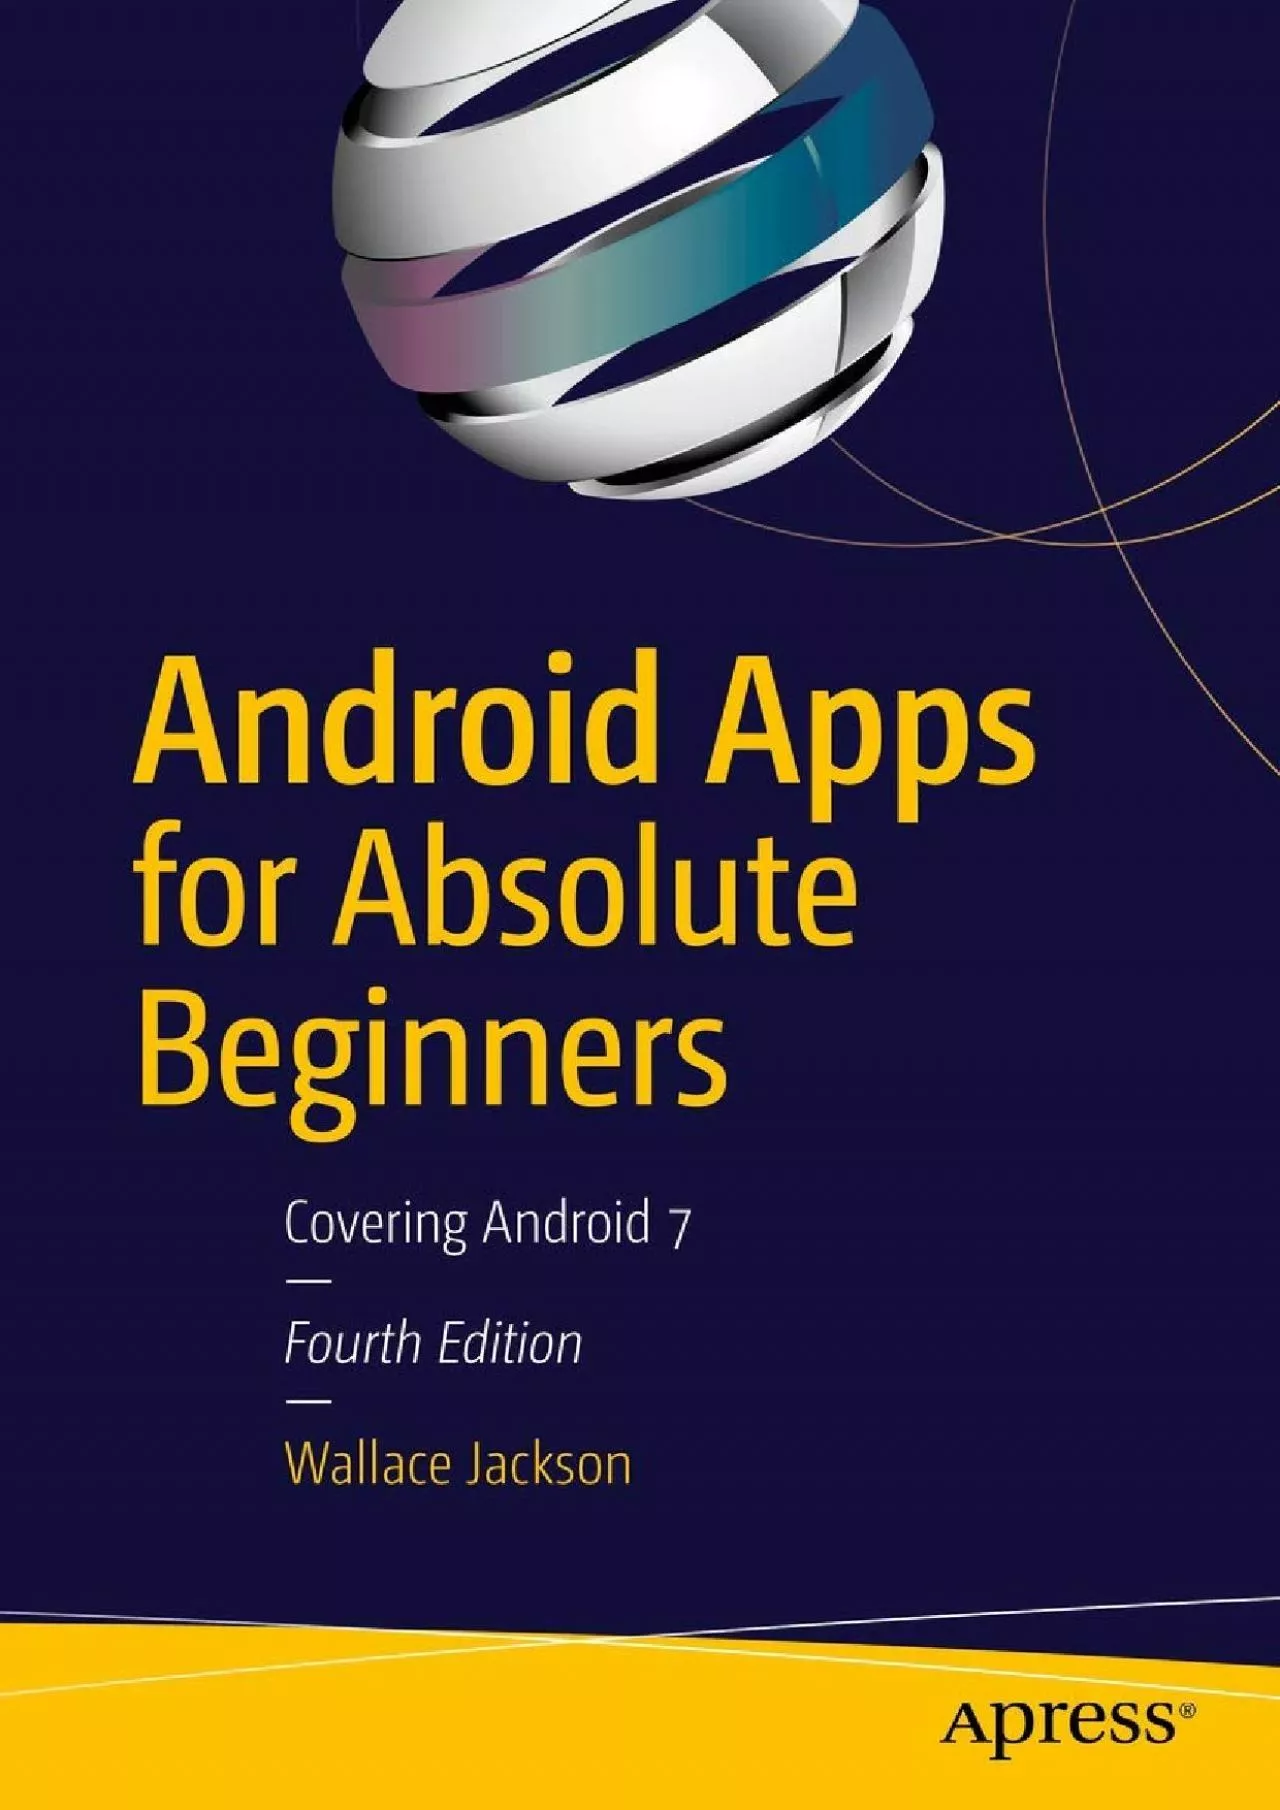 [BEST]-Android Apps for Absolute Beginners: Covering Android 7